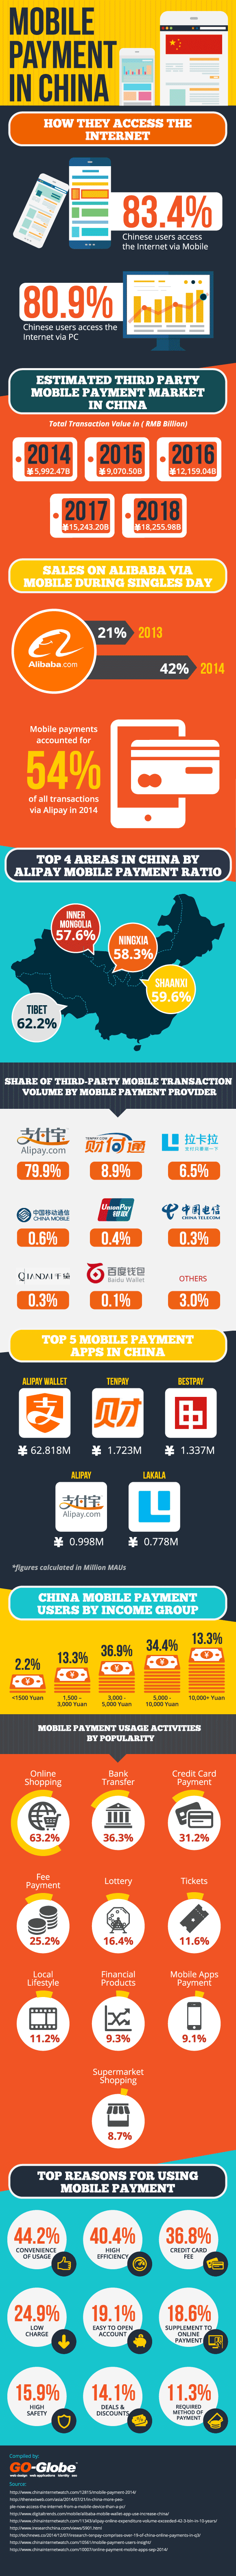 mobile-payments-china